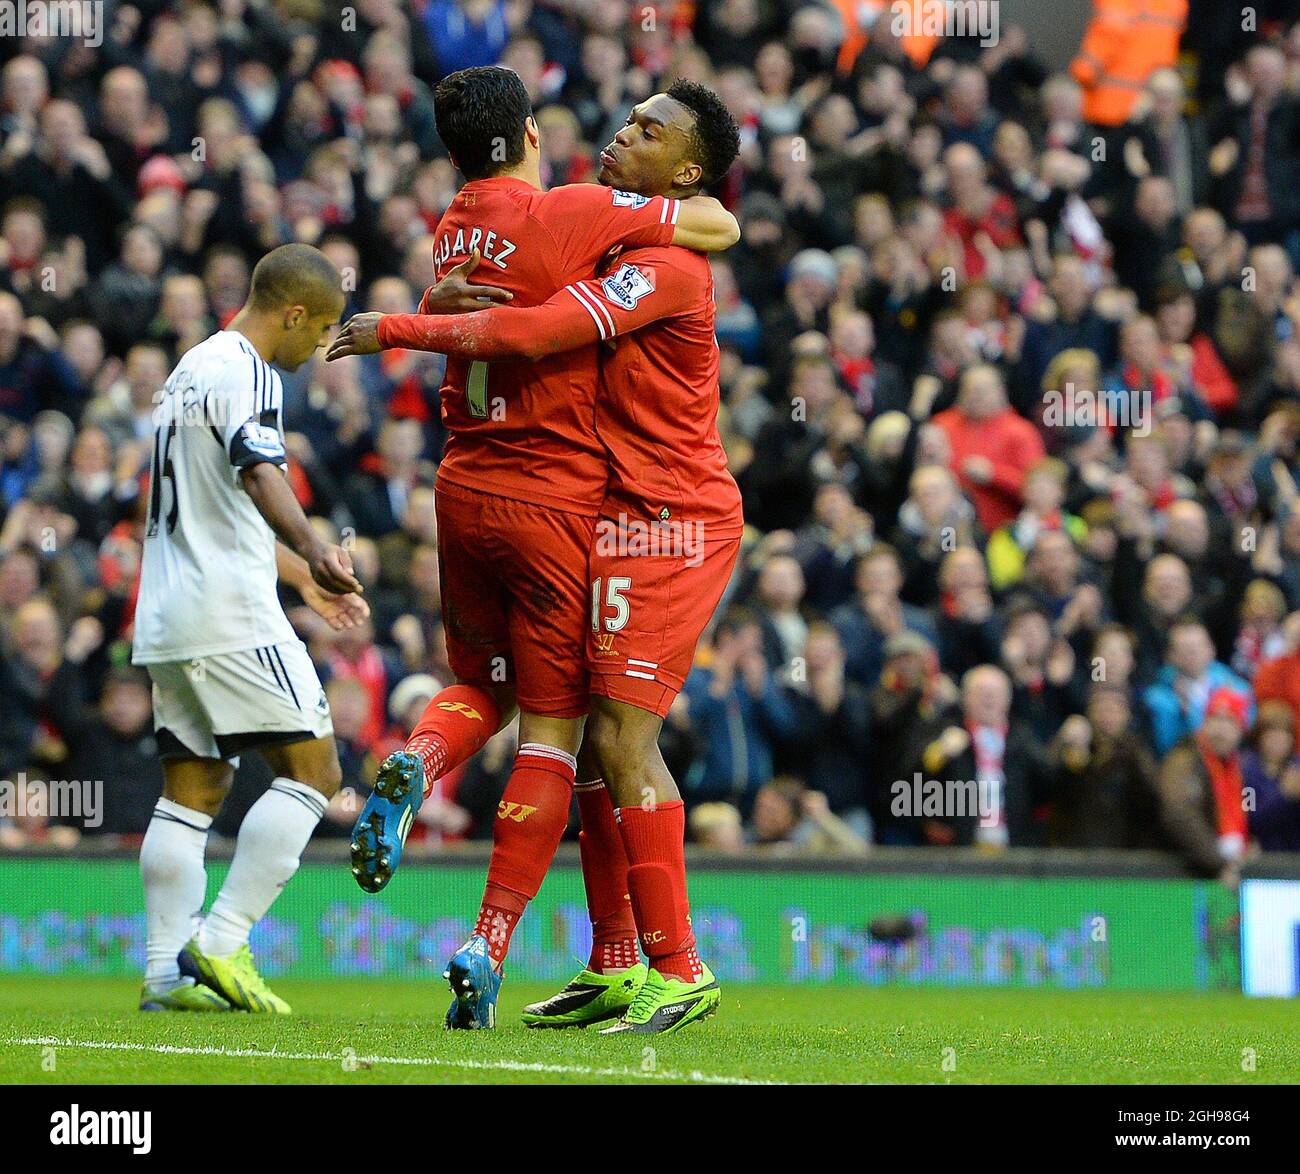 Daniel Sturridge of Liverpool celebrates his second goal with provider Luis Suarez of Liverpool during the Barclays Premier League match between Liverpool and Swansea City held at the Anfield Stadium in Liverpool, England on Feb. 23, 2014. Stock Photo